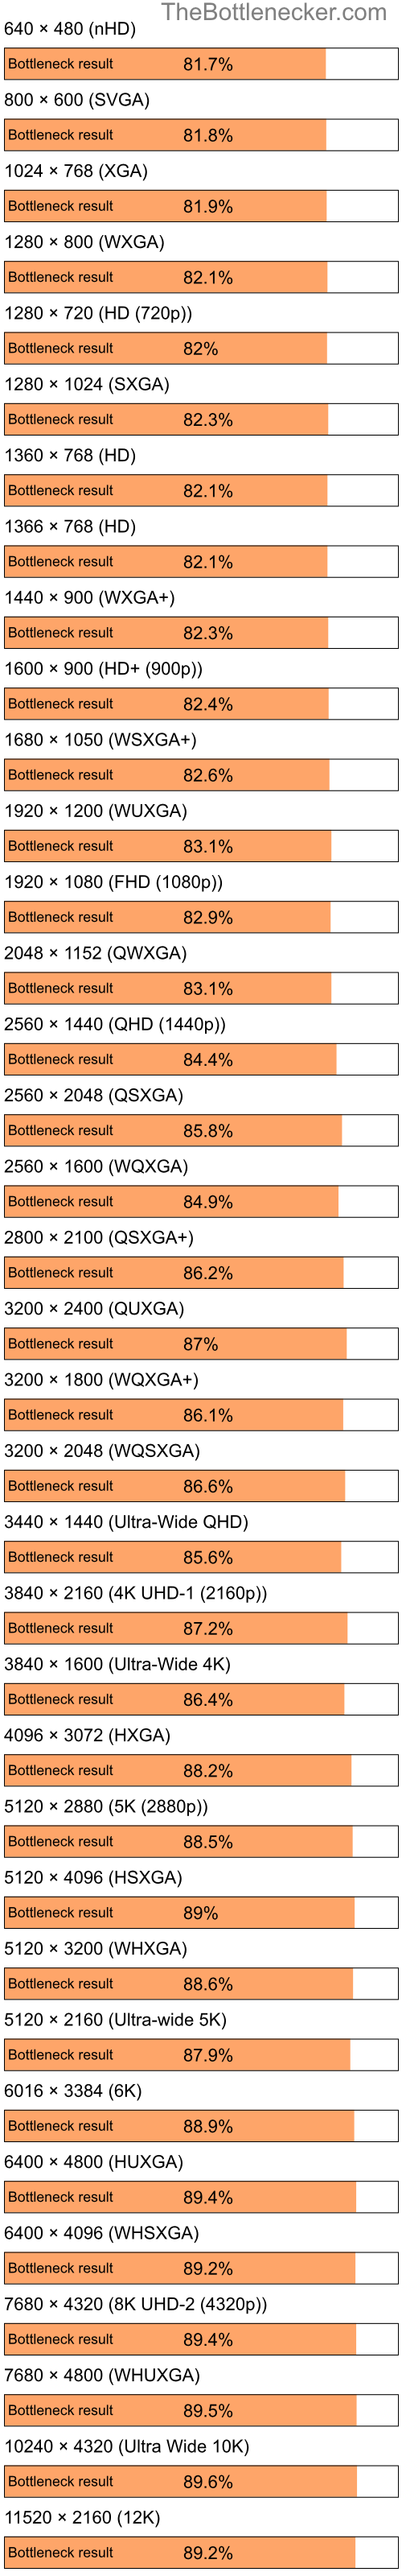 Bottleneck results by resolution for Intel Celeron M 420 and NVIDIA GeForce 7100 in Graphic Card Intense Tasks